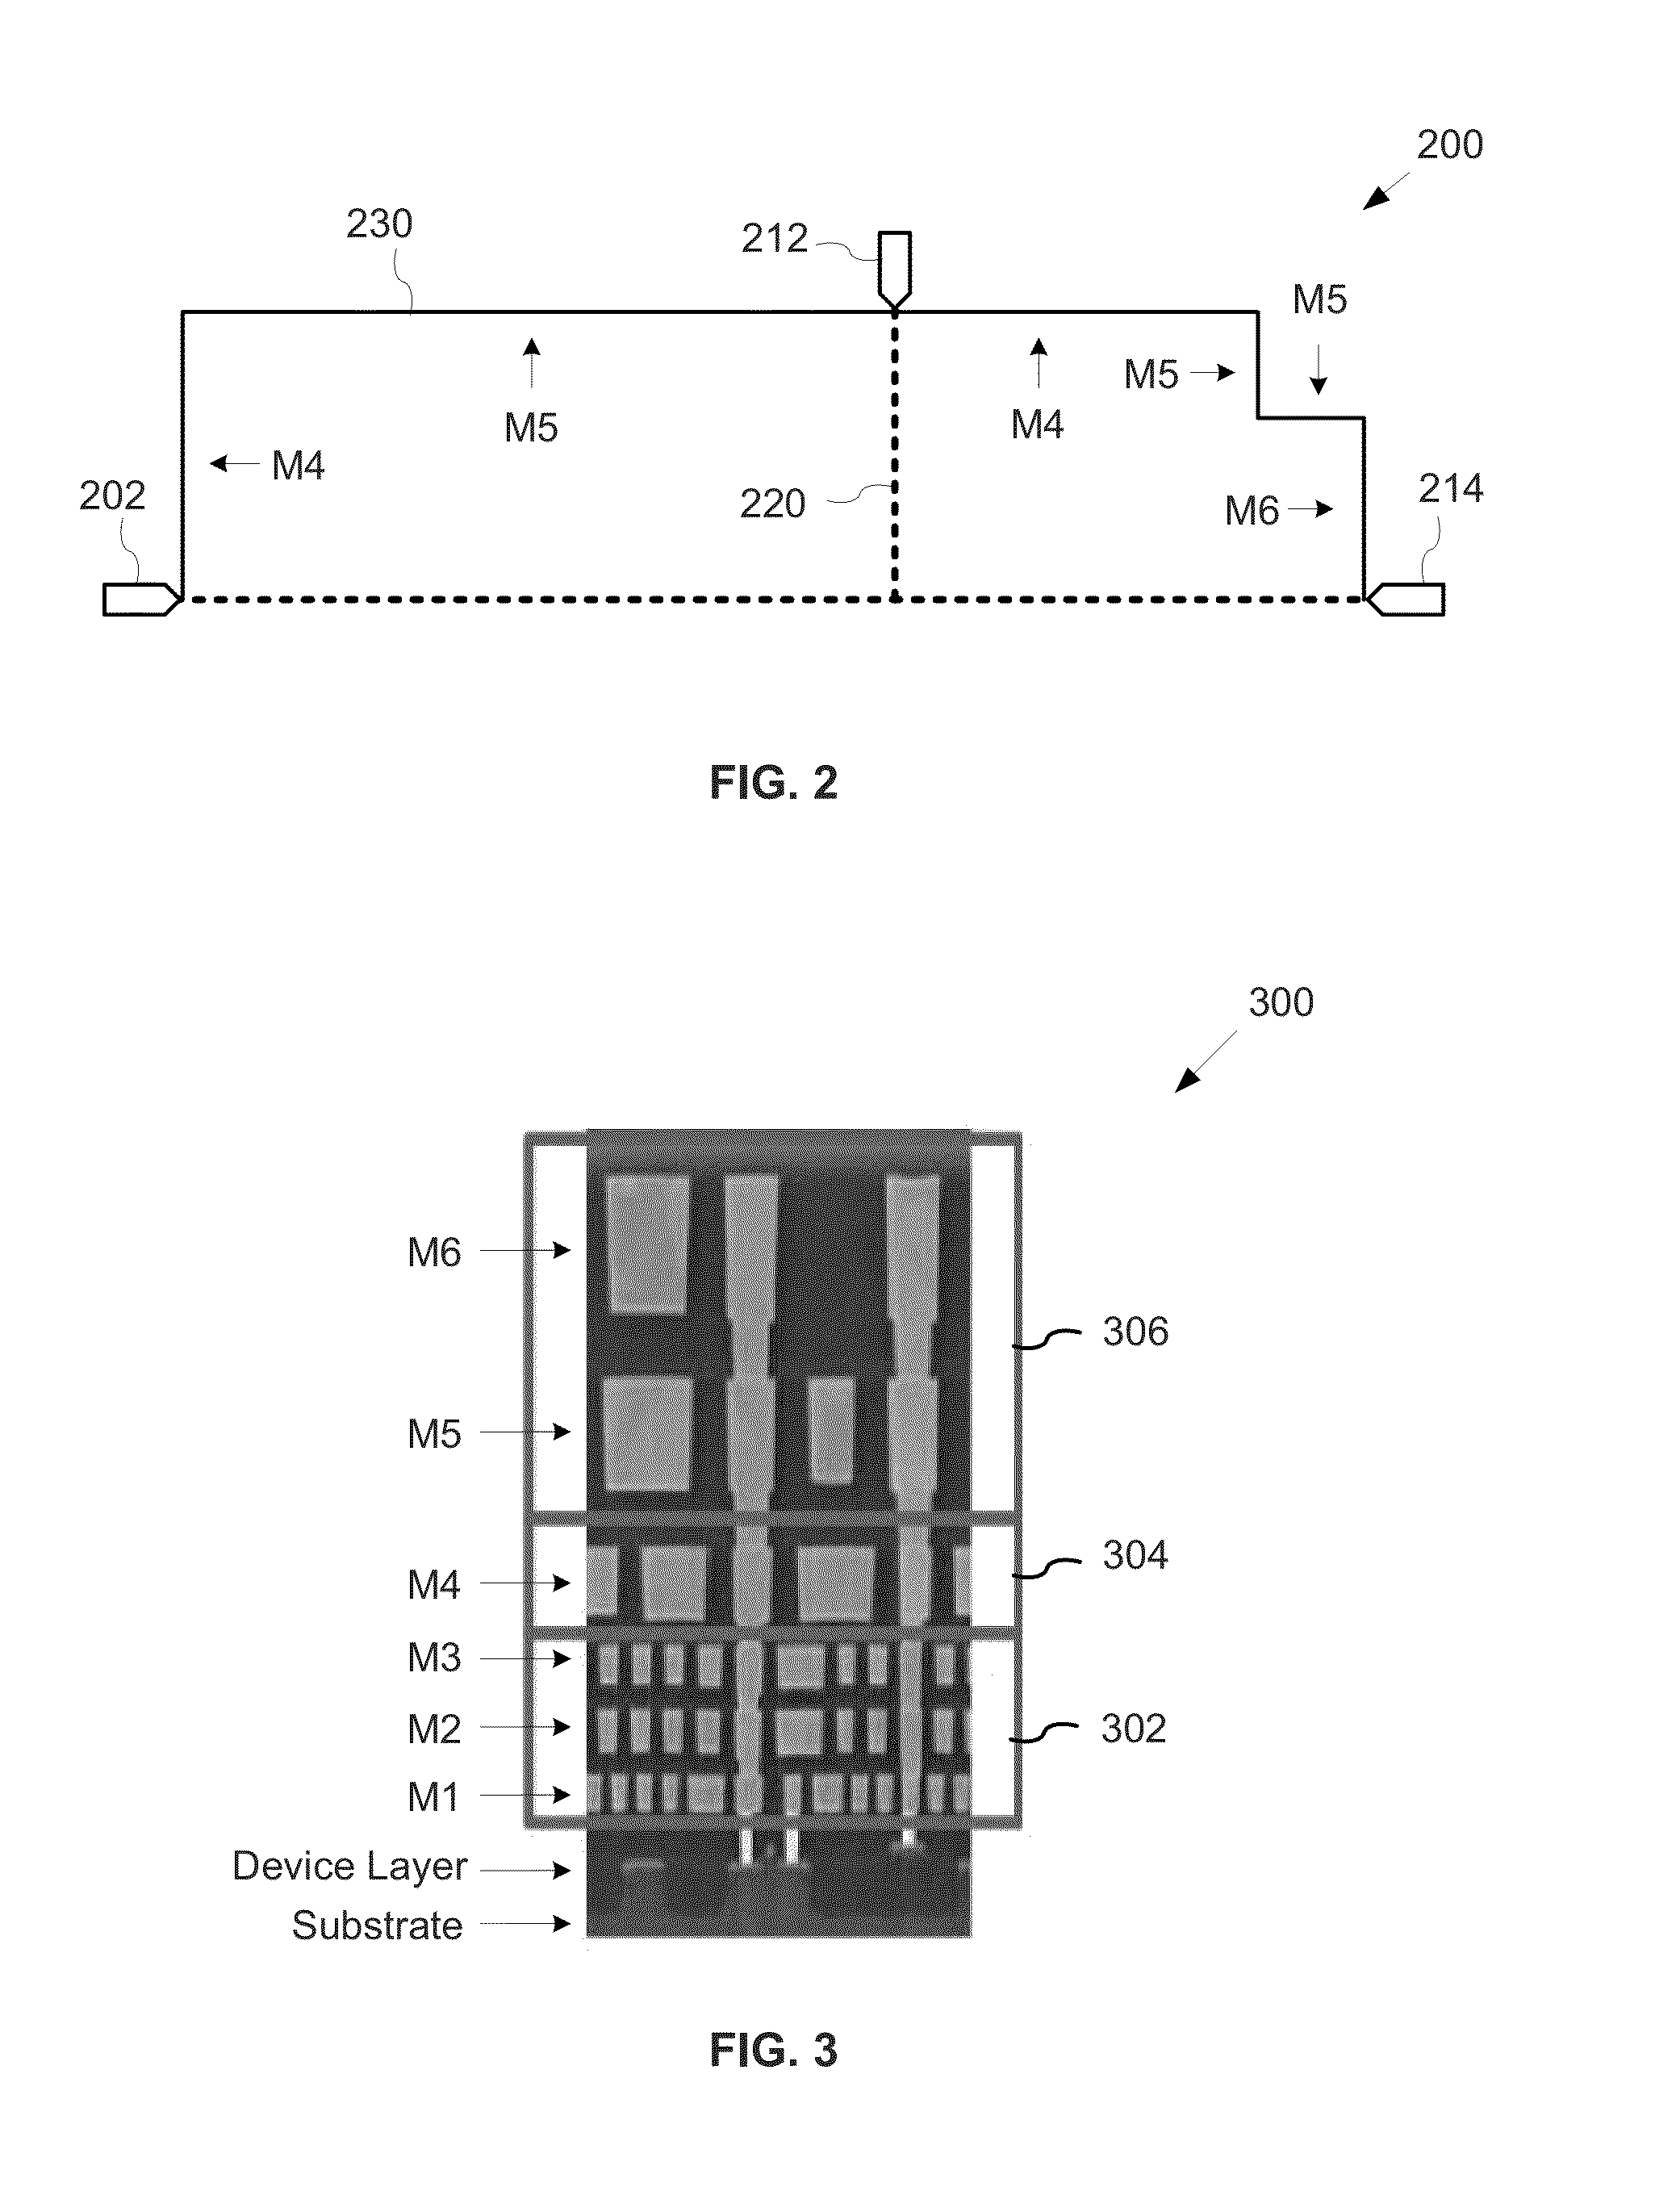 Method and apparatus to generate pattern-based estimated rc data with analysis of route information